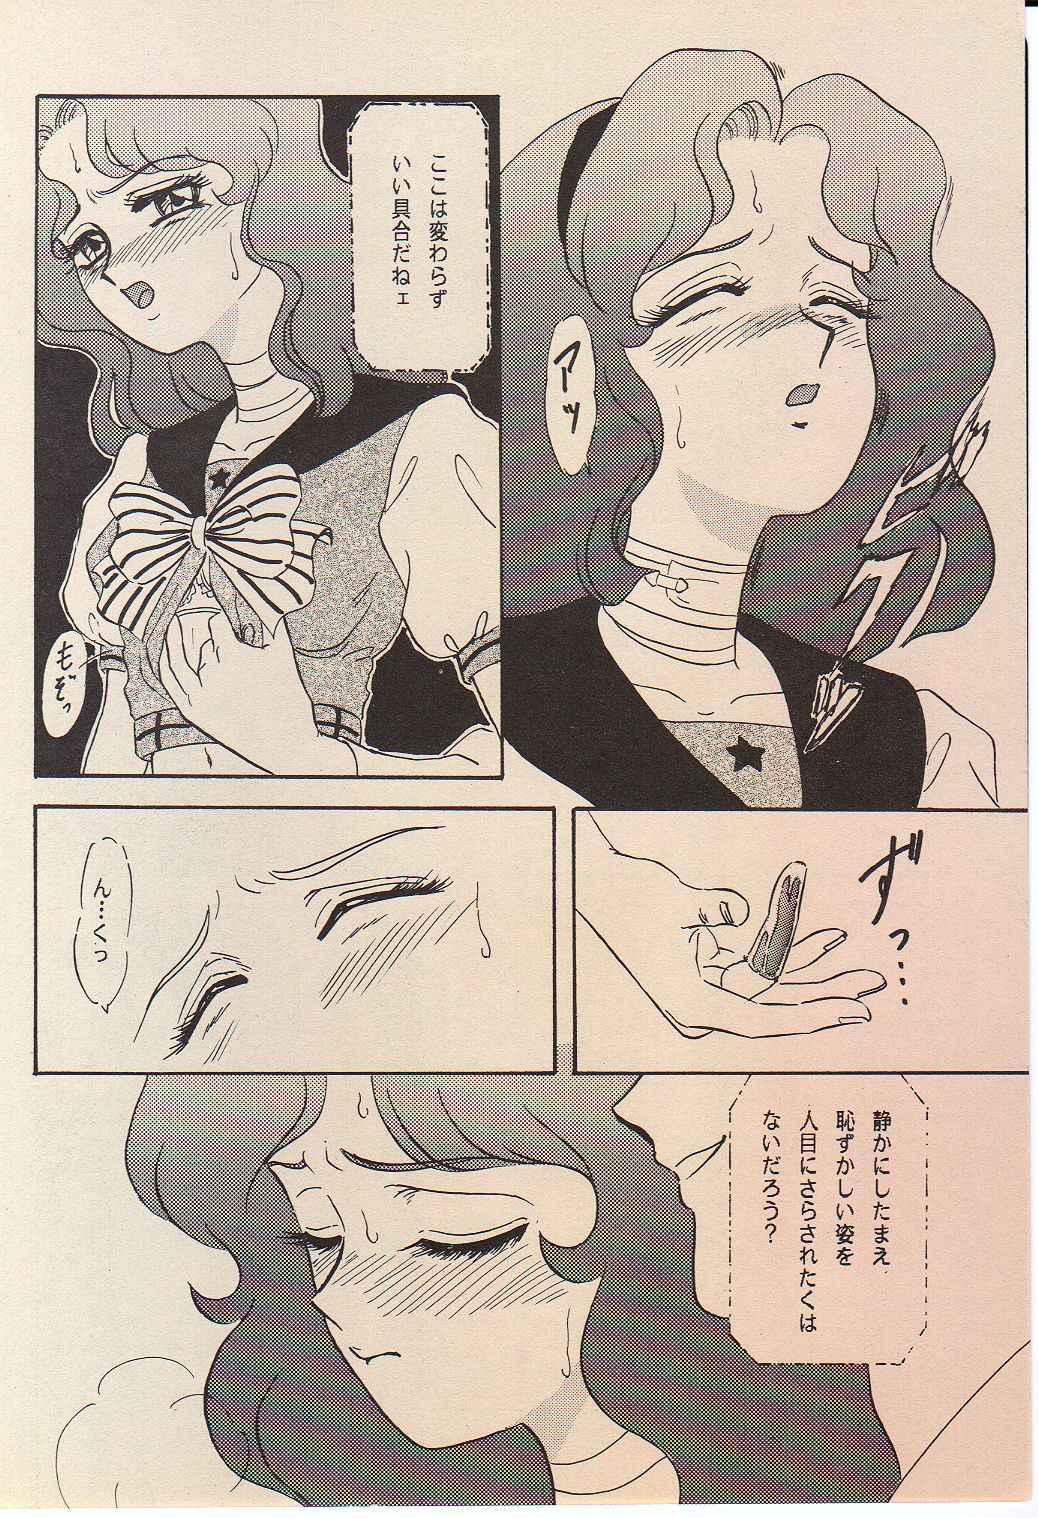 Blow Lunch Box 11 - Twinkle Twinkle - Sailor moon Star - Page 11